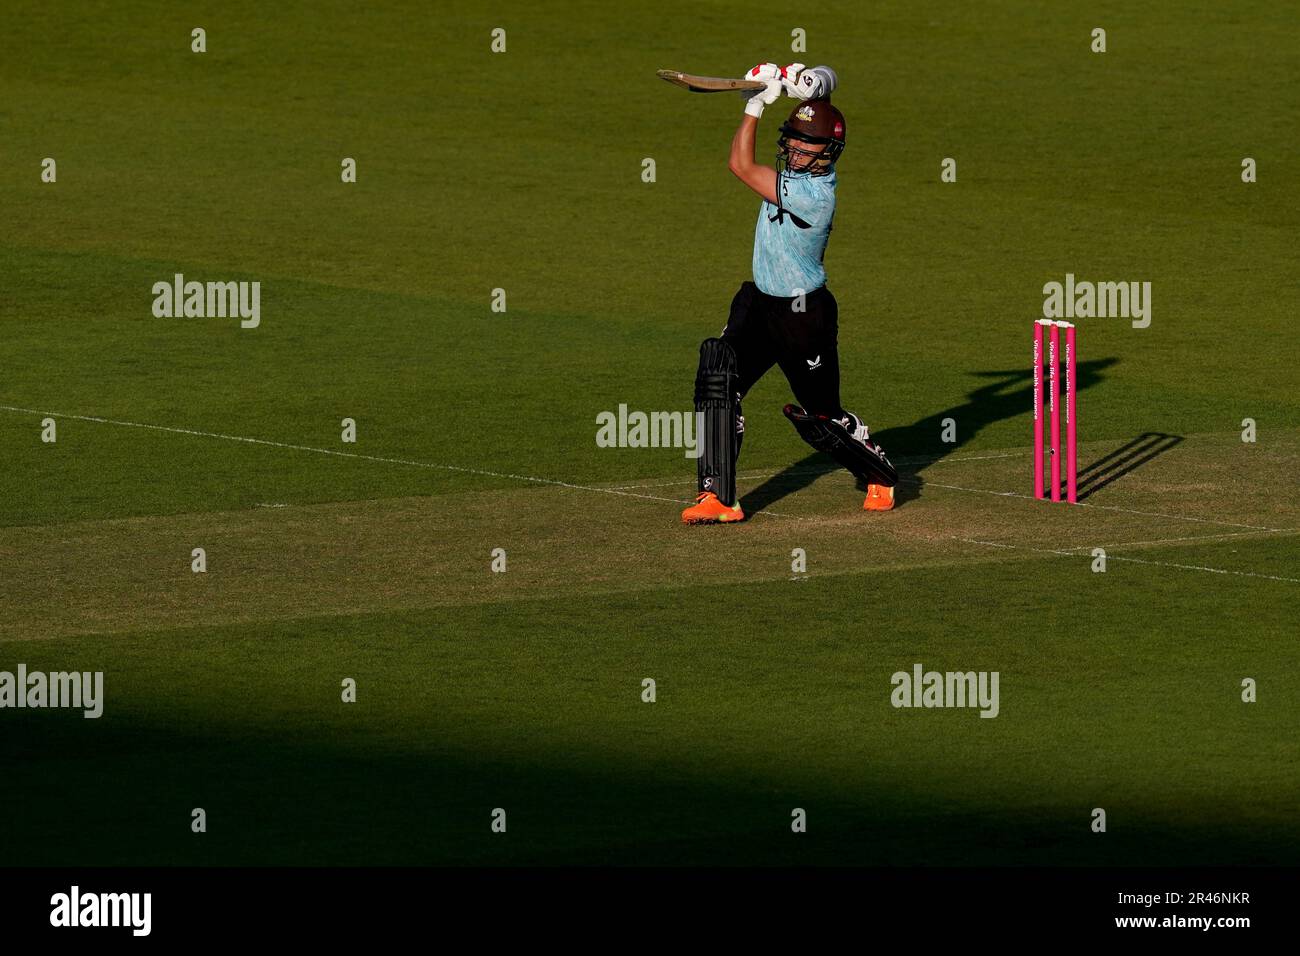 Surrey’s Sam Curran hits out on his way to a score of 15 during the Vitality Blast T20 match at the Kia Oval, London Picture date: Friday May 26, 2022. Stock Photo